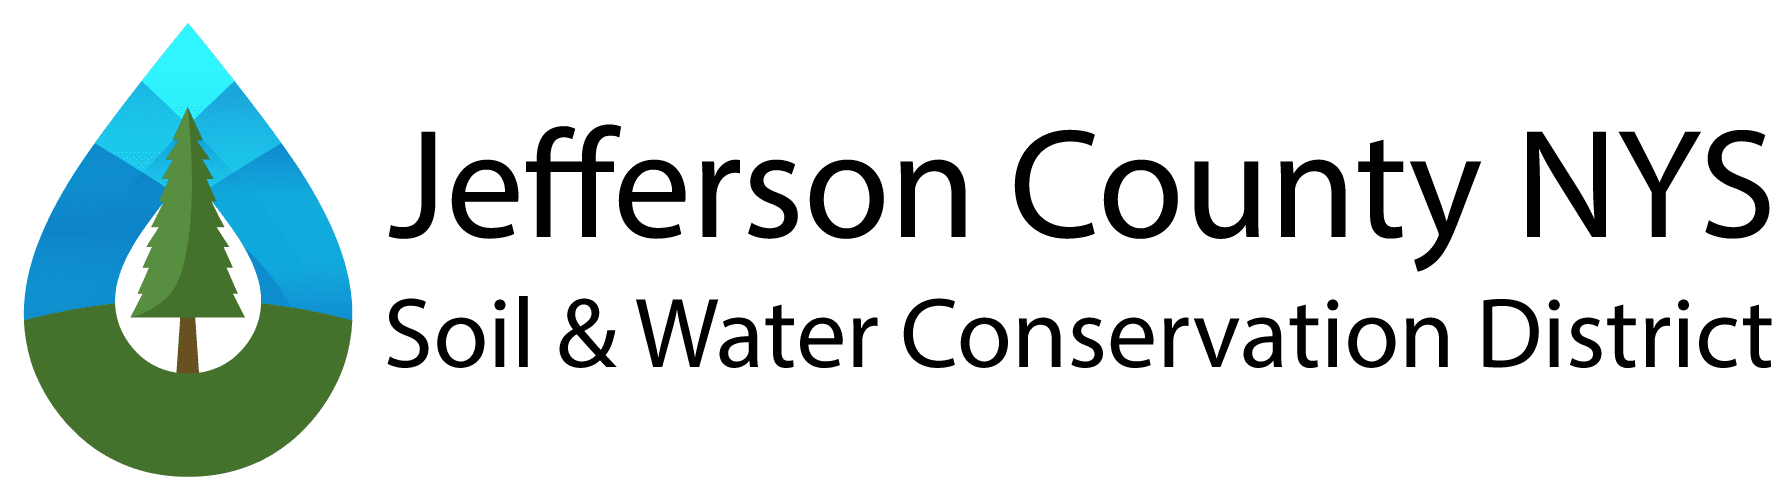 Jefferson County Soil & Water Conservation District